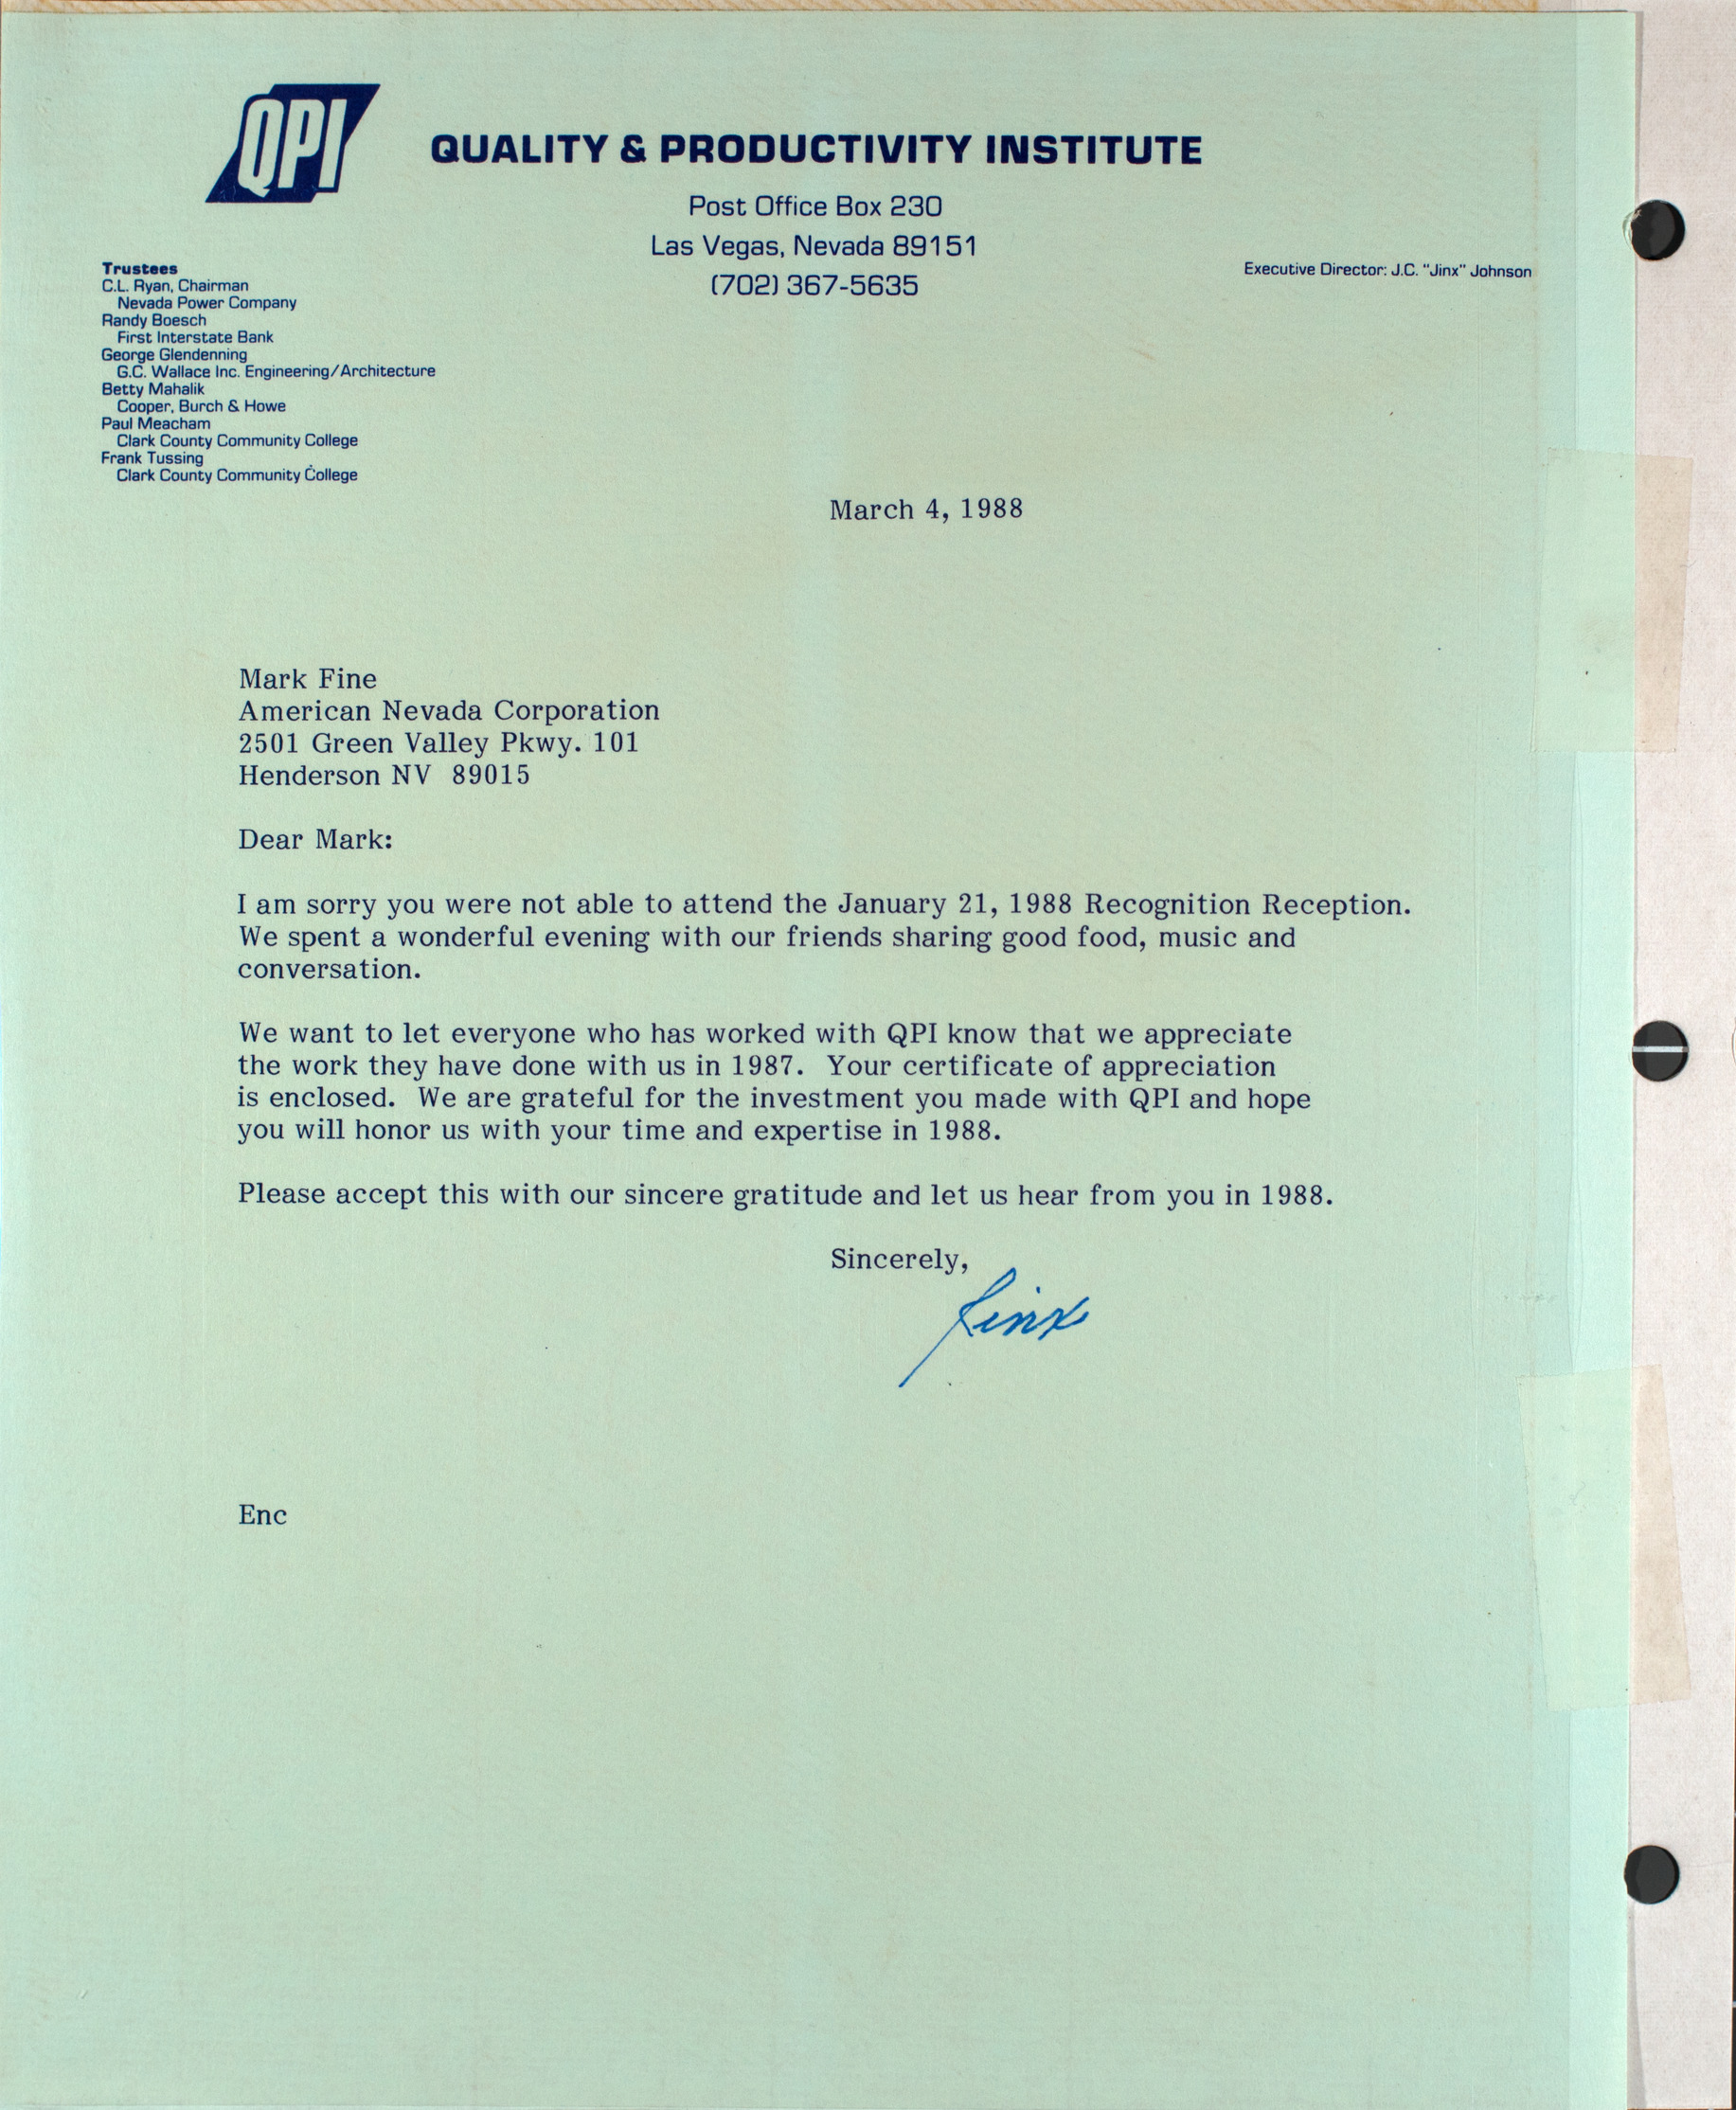 Letter from Quality and Productivity Institute to Mark Fine, March 4, 1988